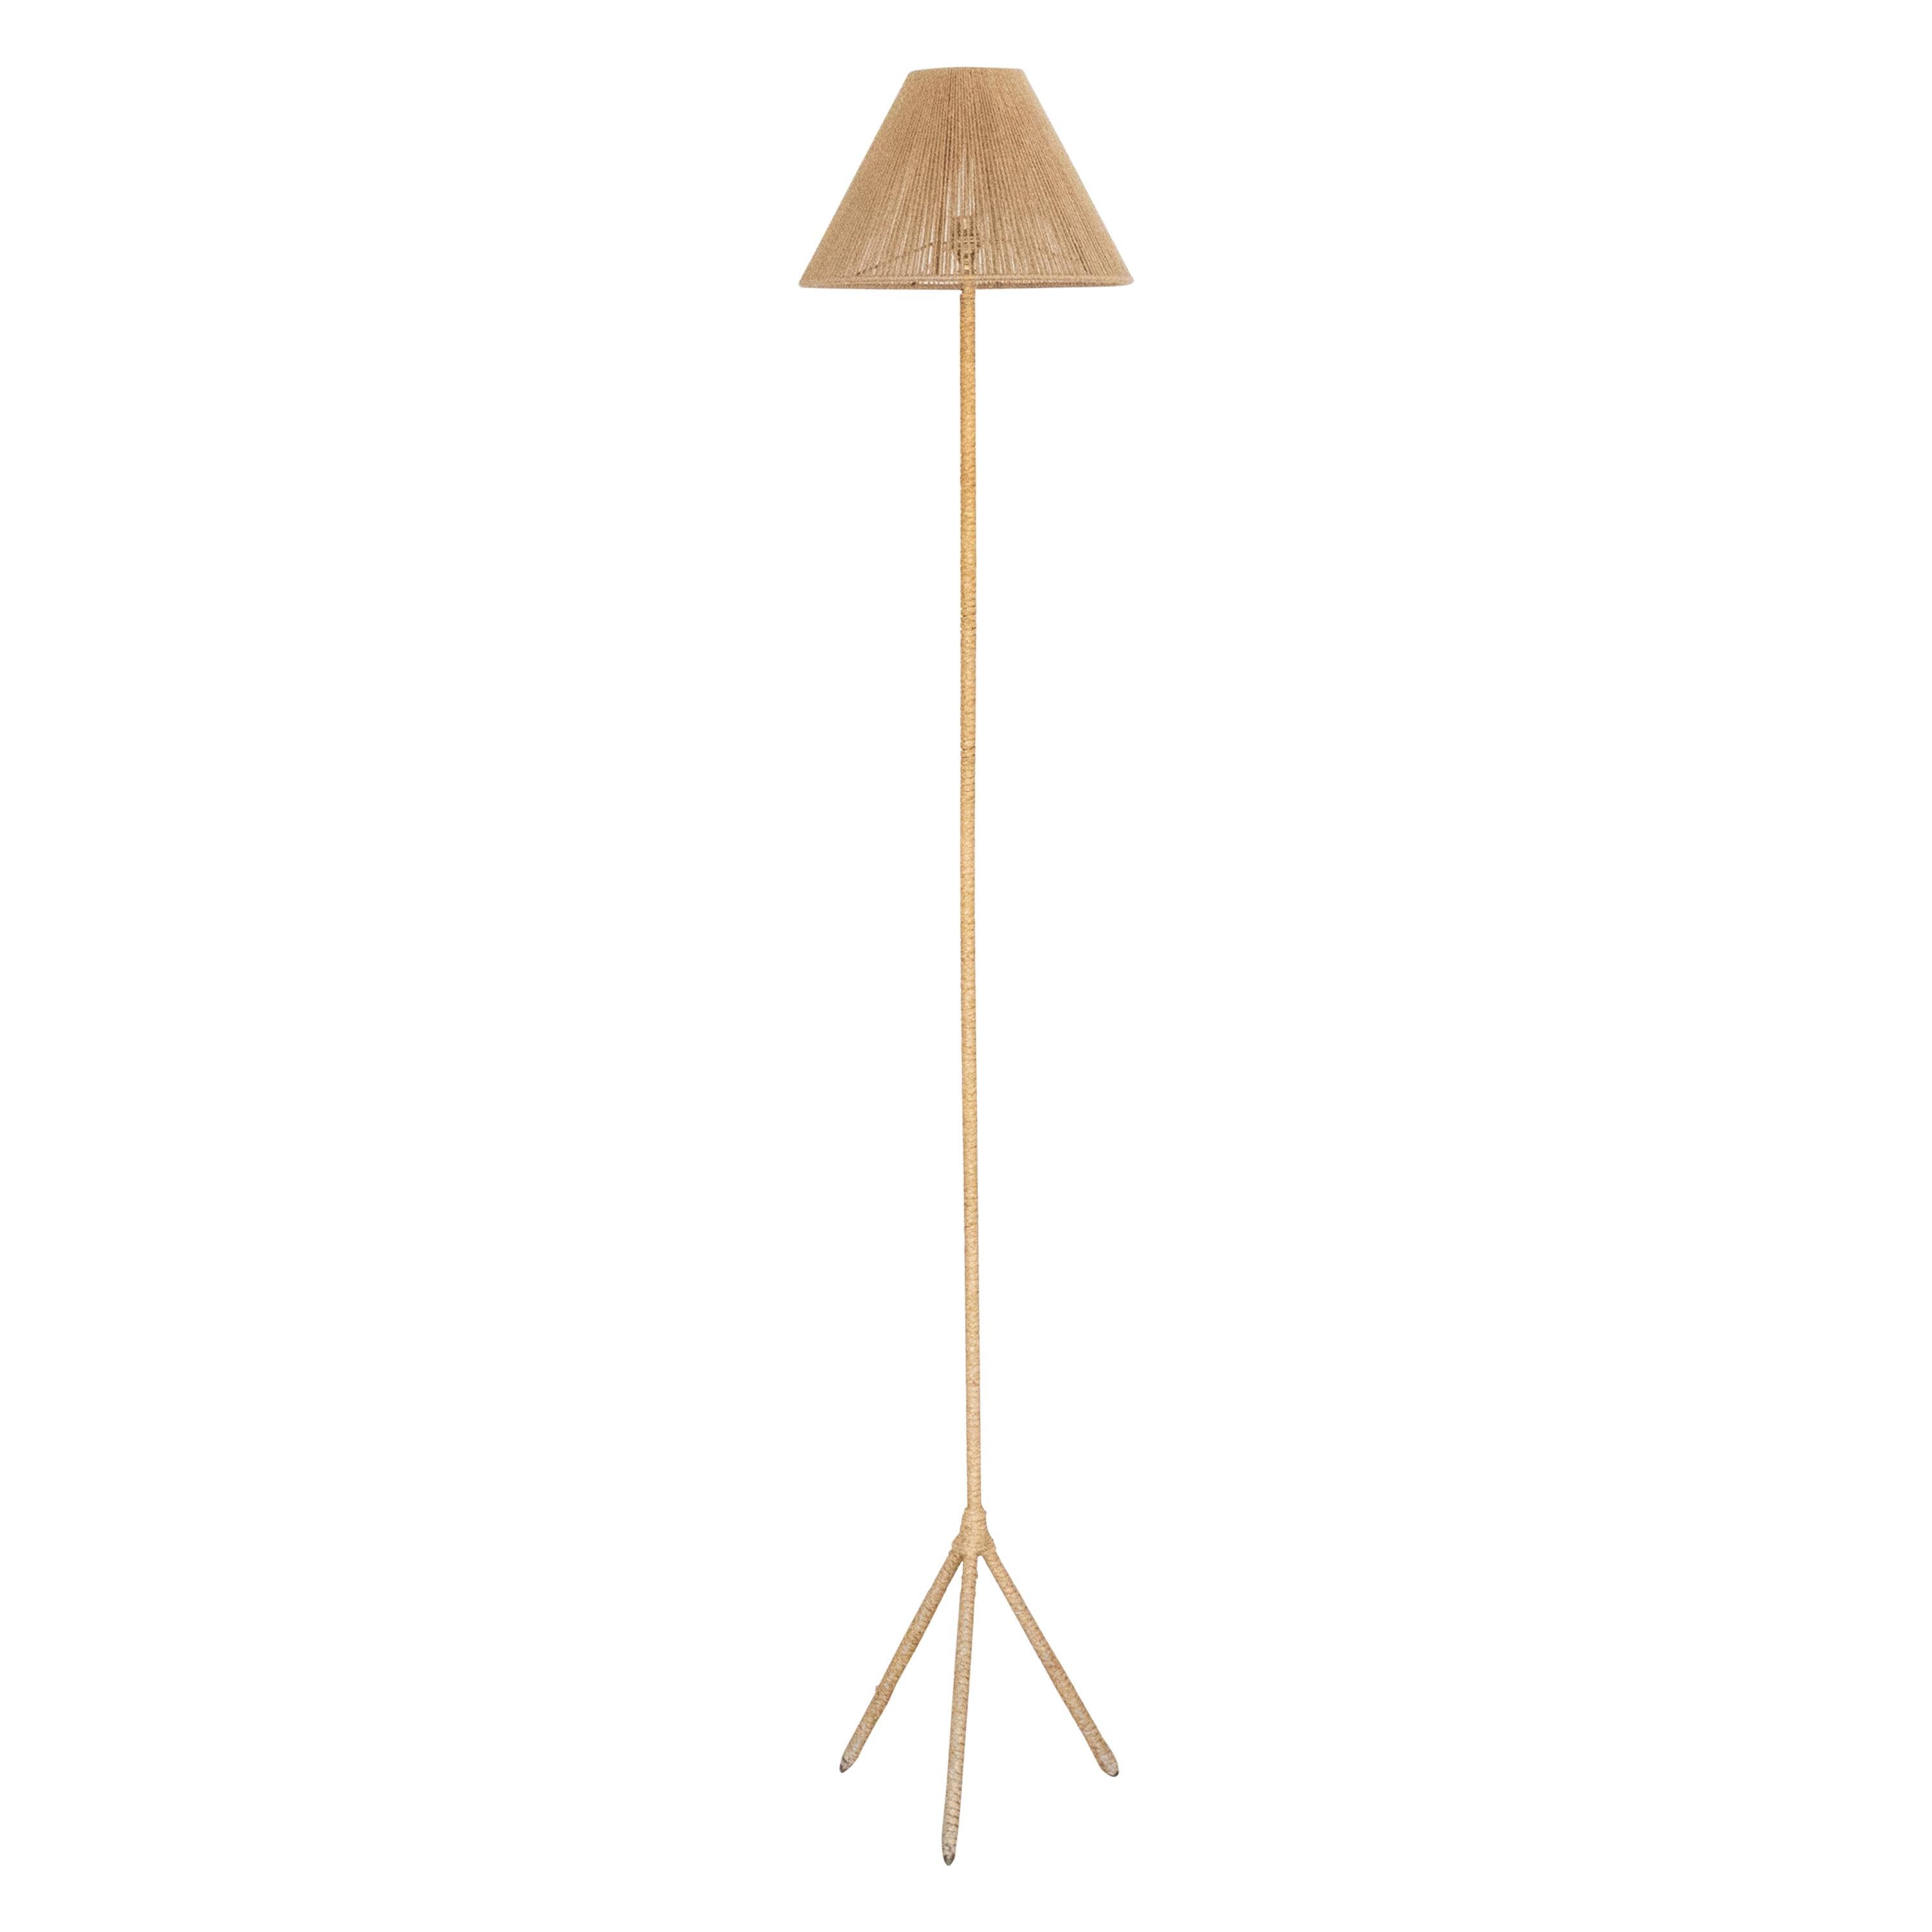 French Woven Floor Lamp with Rope Shade